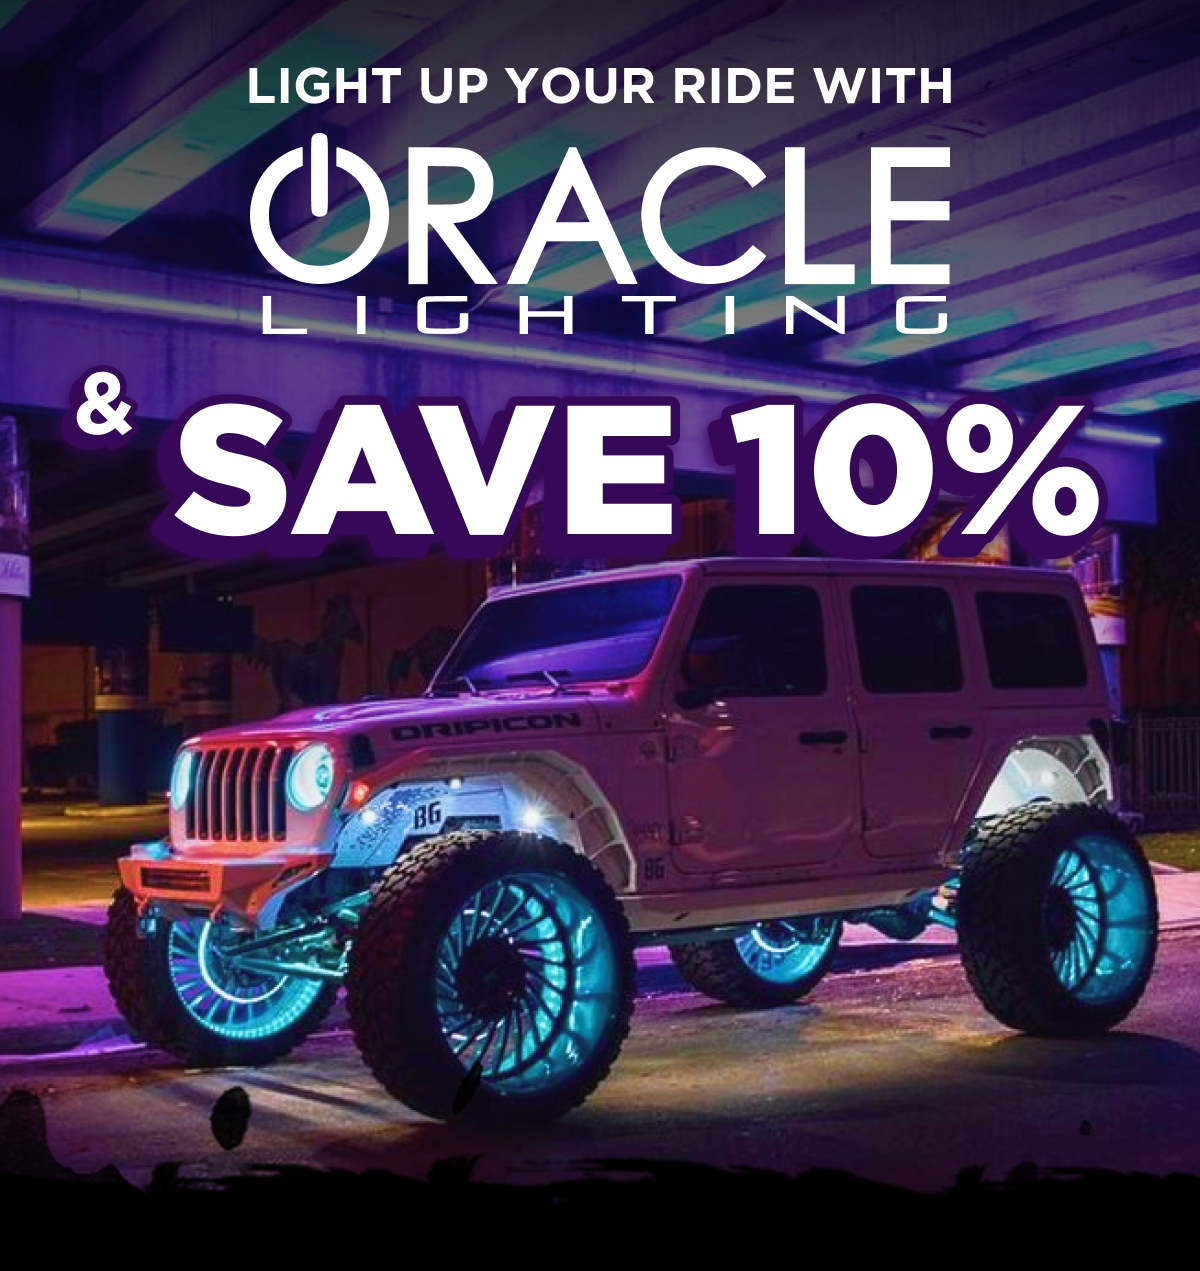 Light Up Your Ride With Oracle Lighting & Save 10%